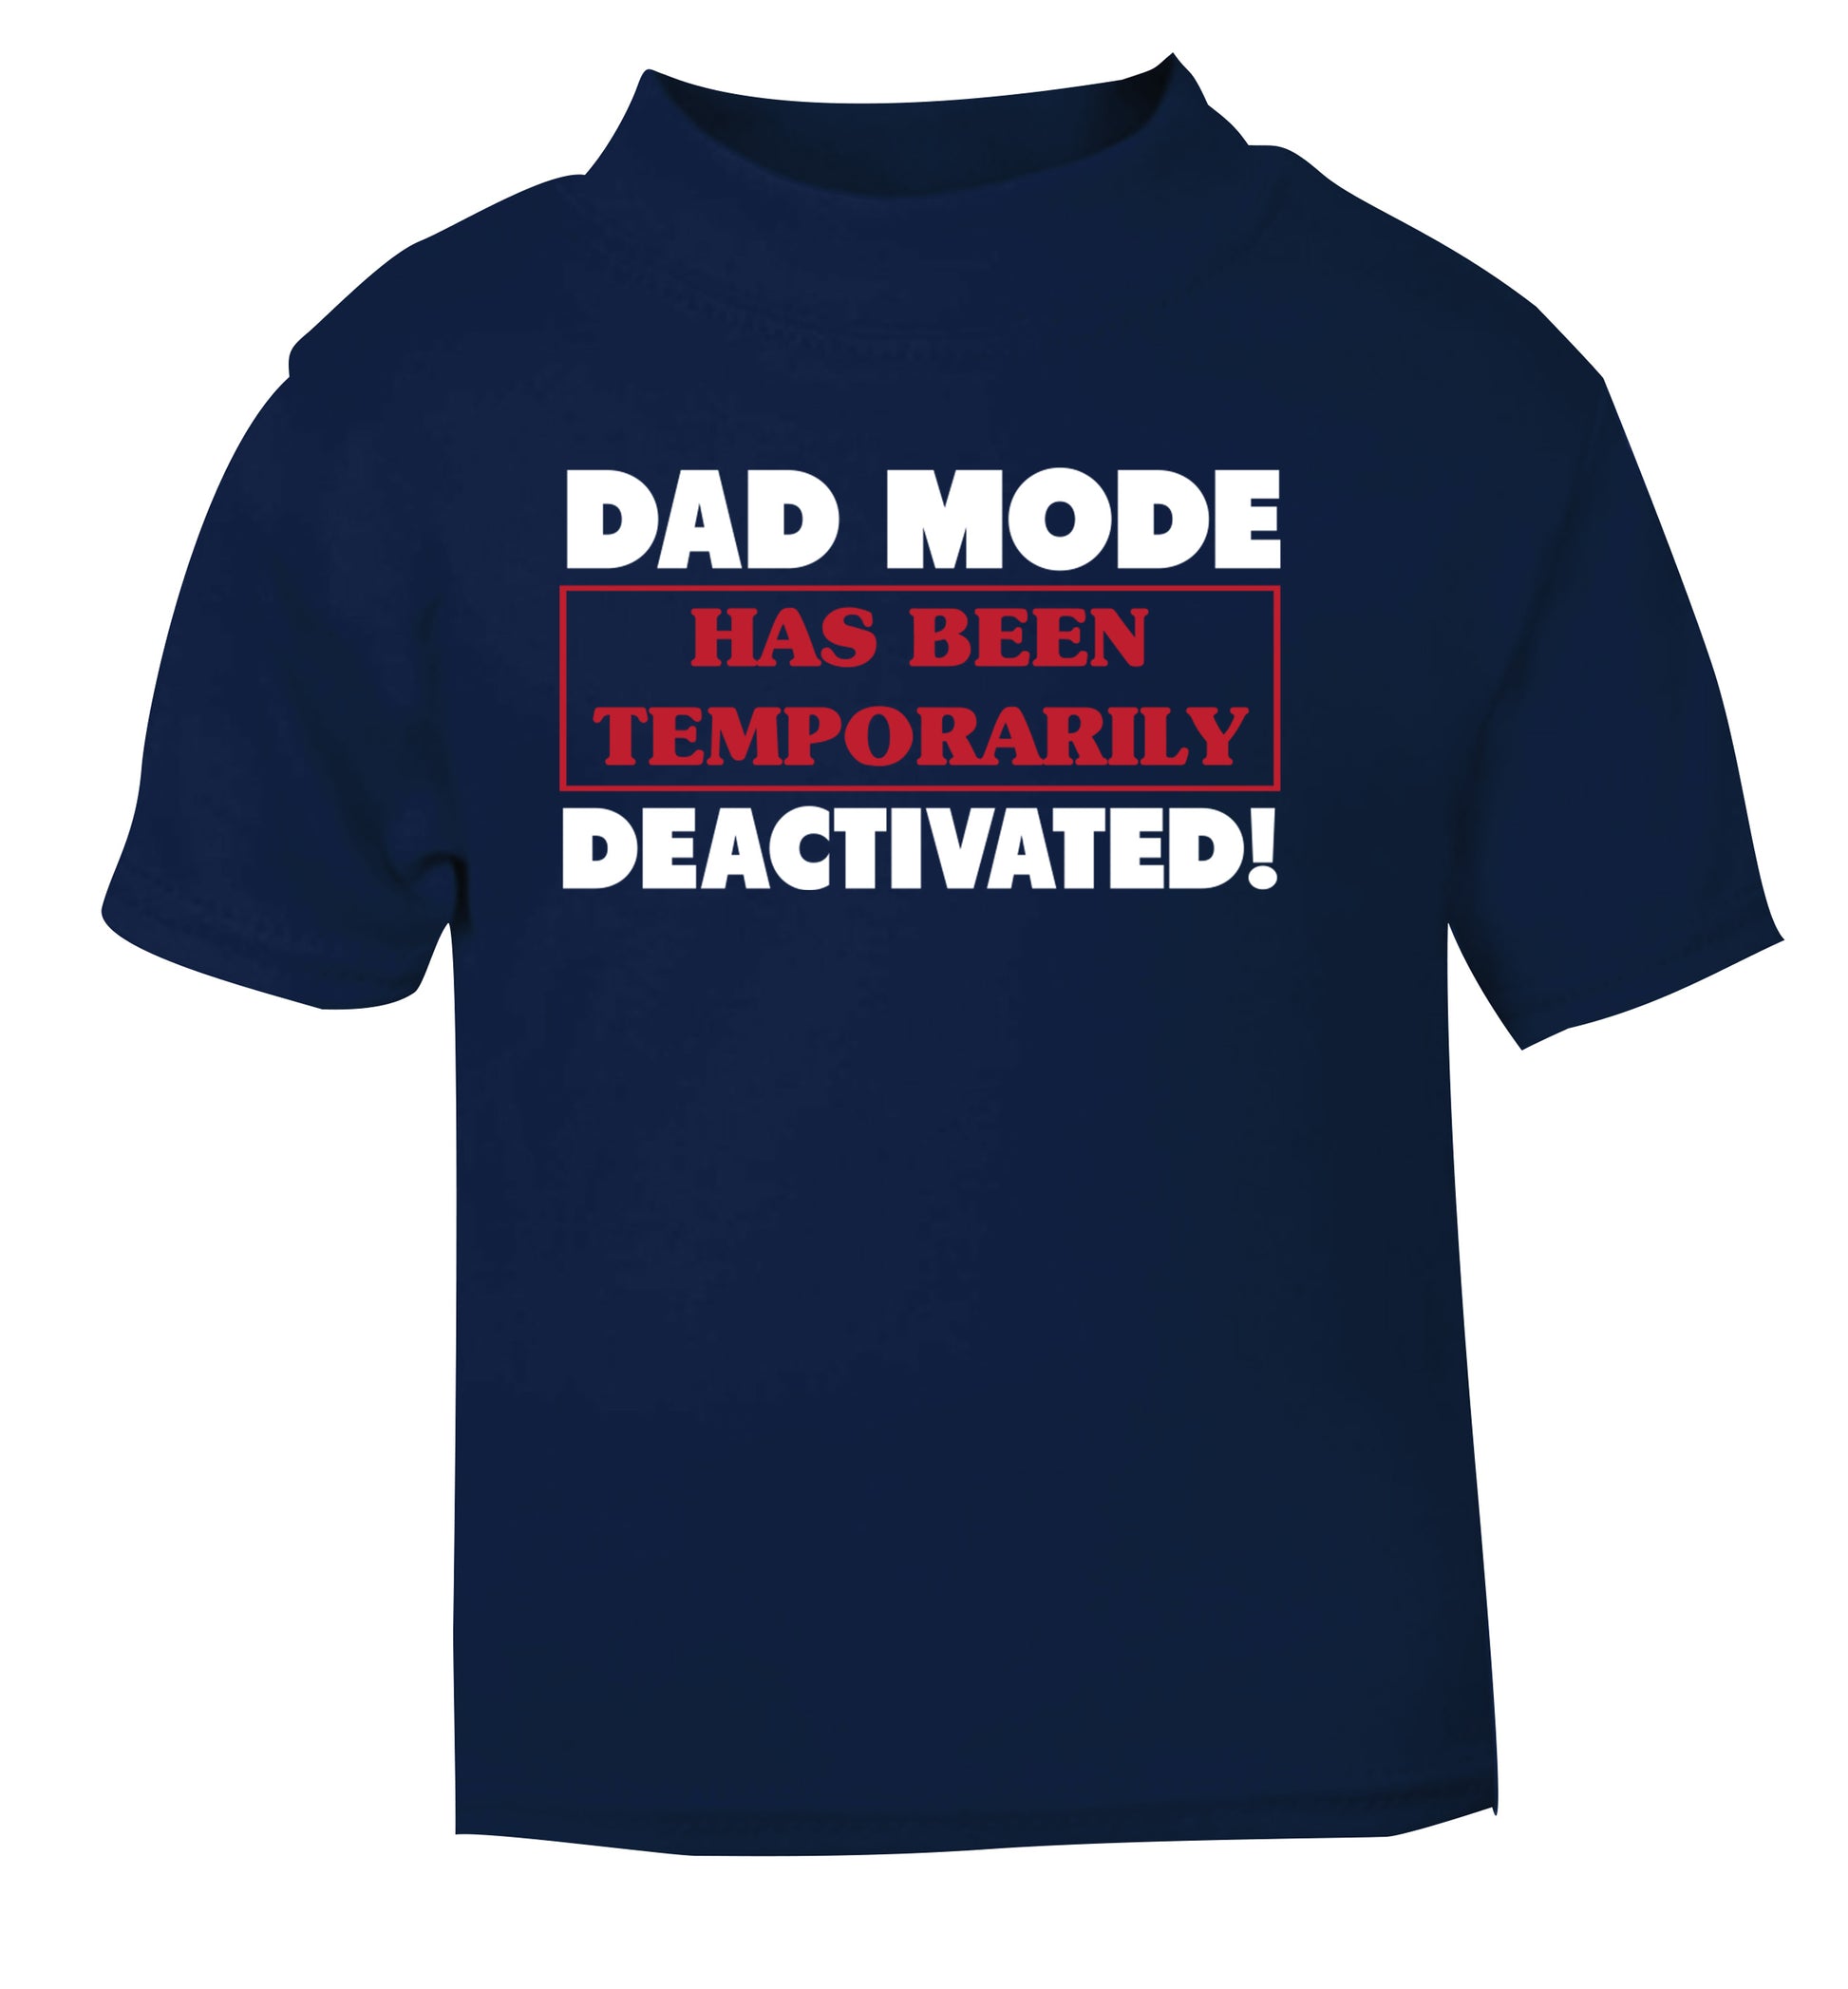 Dad mode has been temporarily deactivated! navy Baby Toddler Tshirt 2 Years